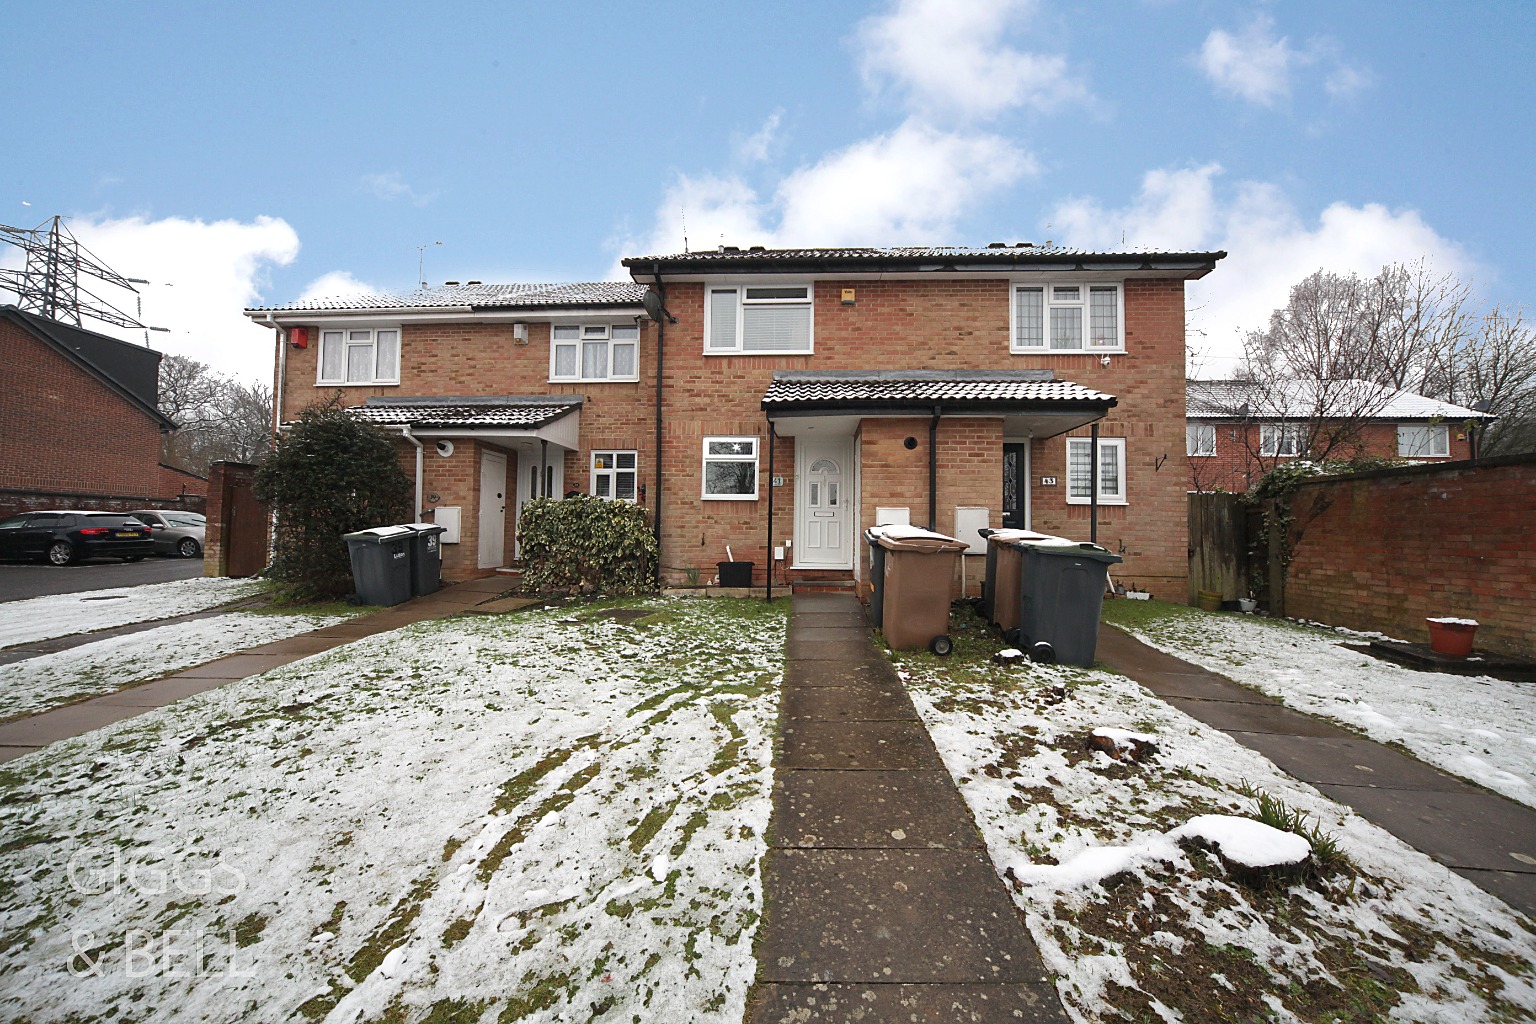 2 bed terraced house for sale in Oregon Way, Luton, LU3 